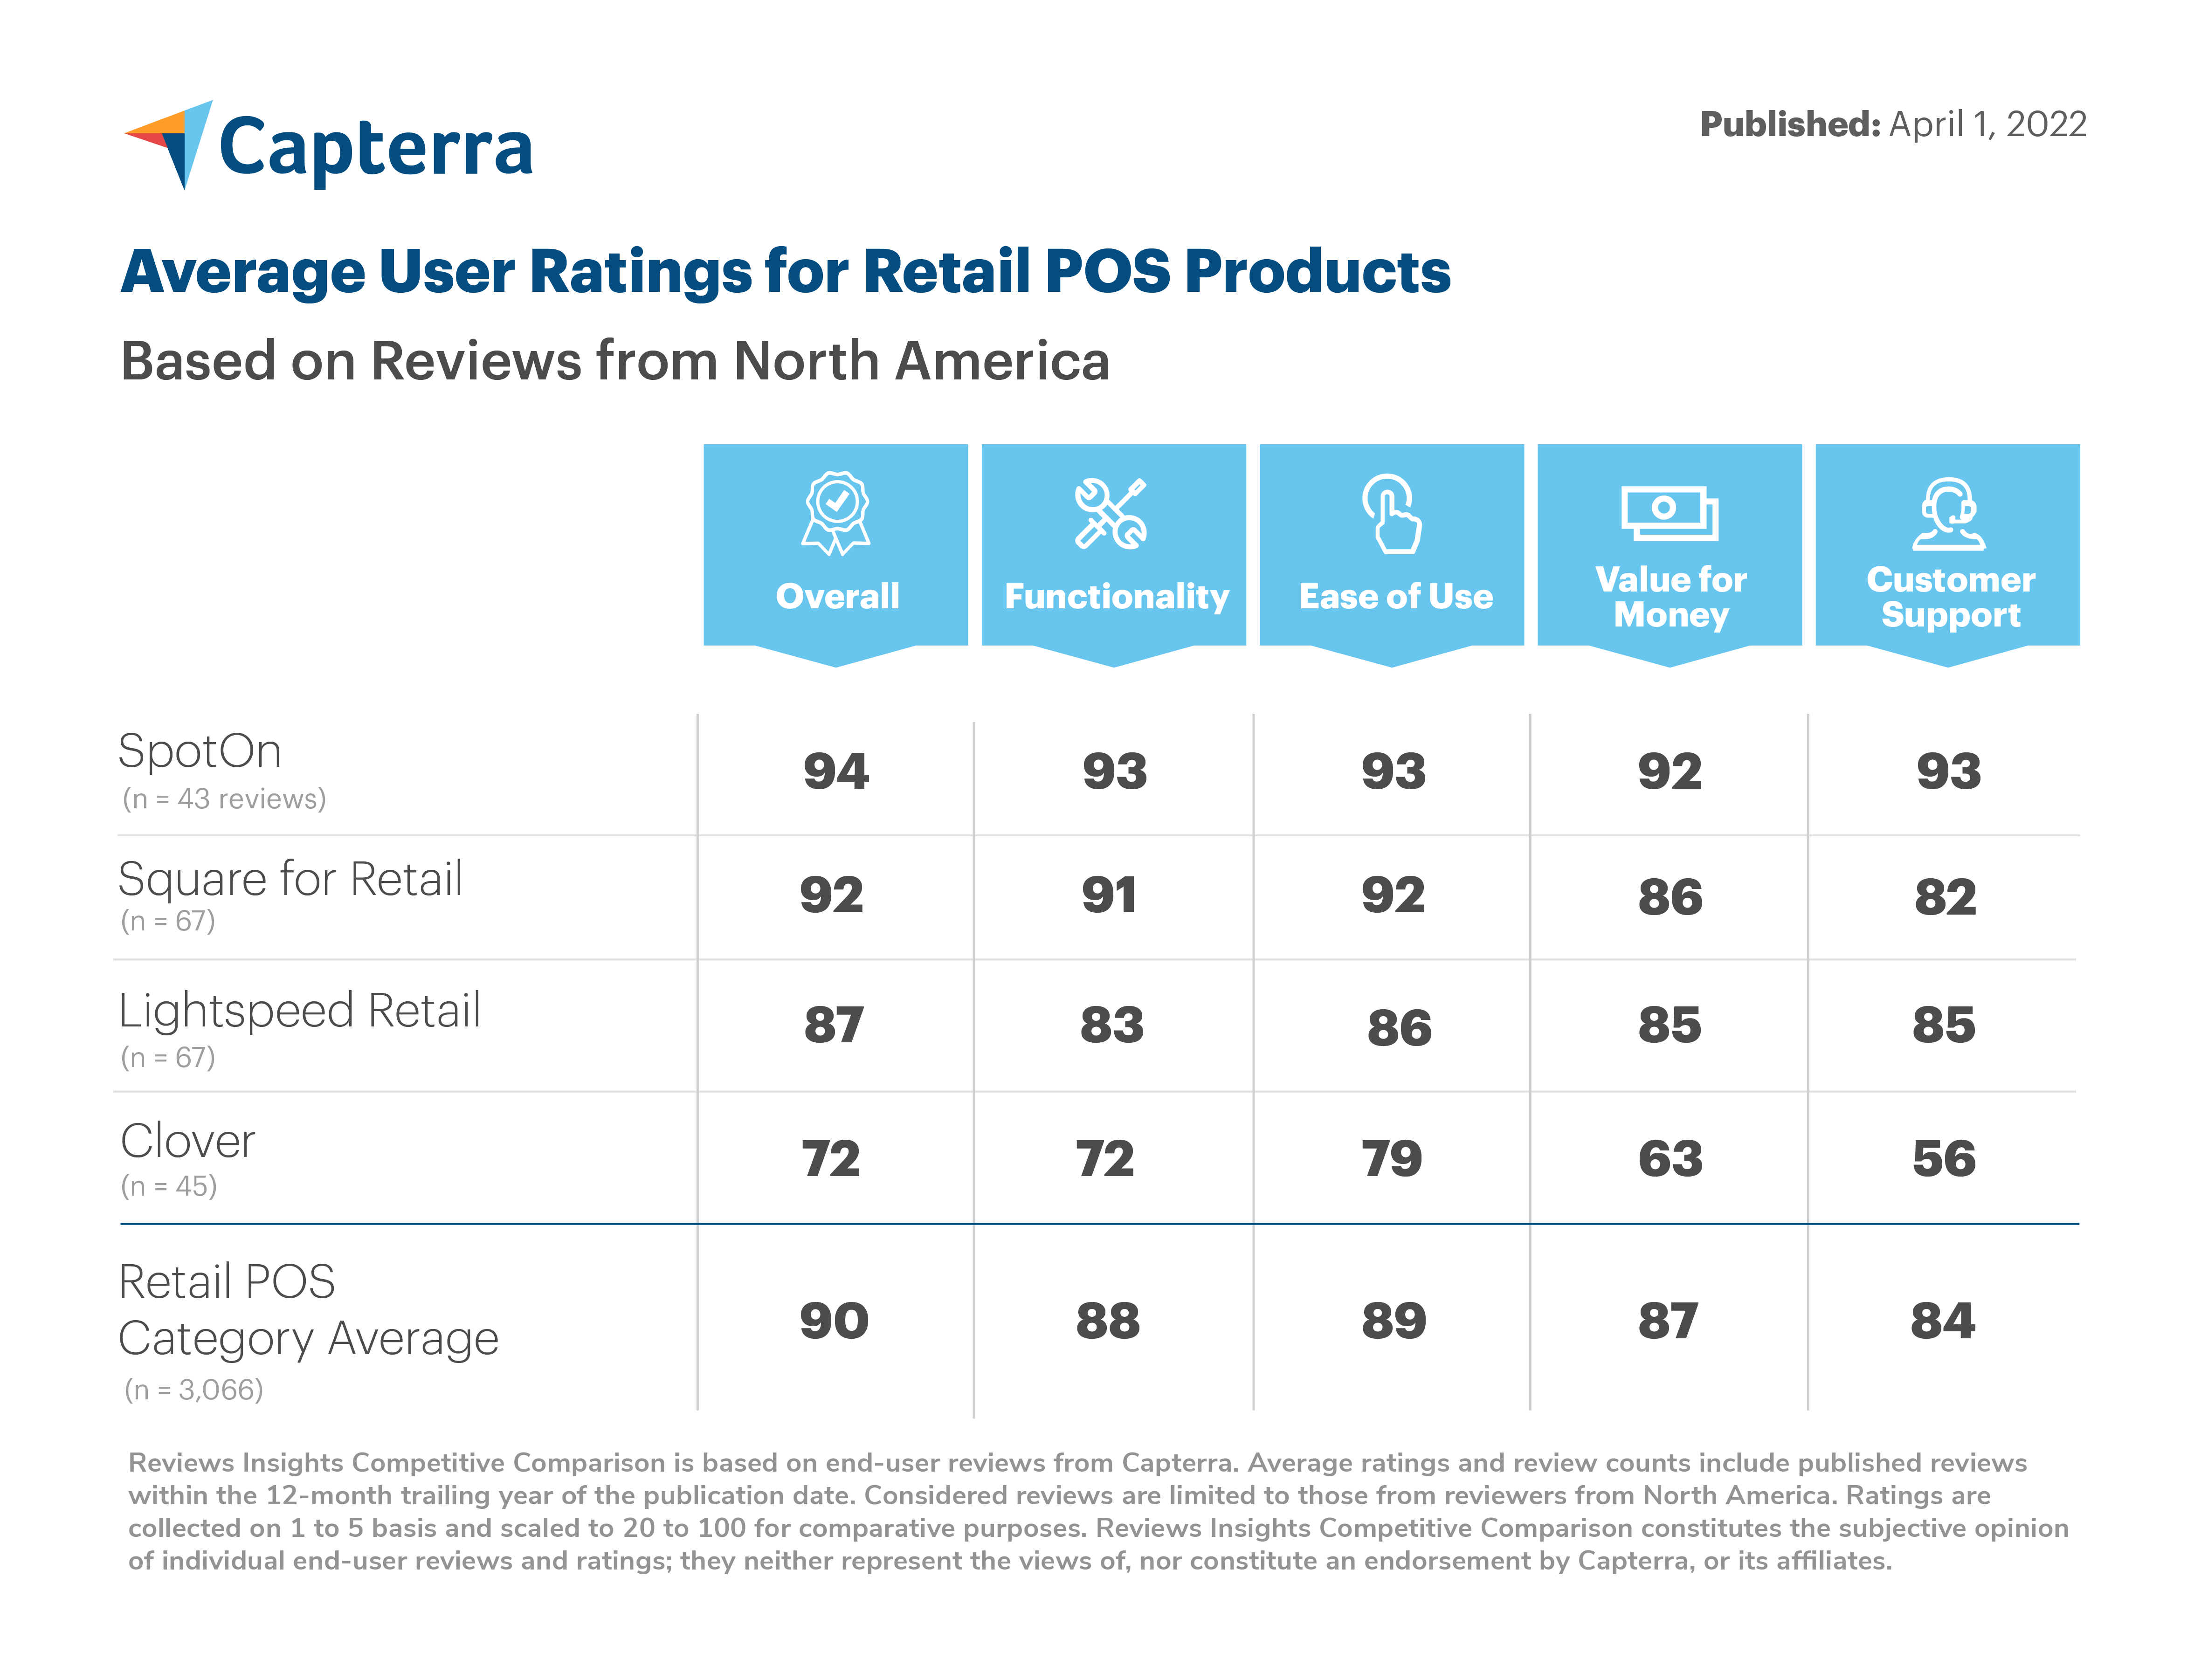 Capterra average user ratings for retail POS products: SpotOn 94, Square 92, Lightspeed 87, Clover 72 